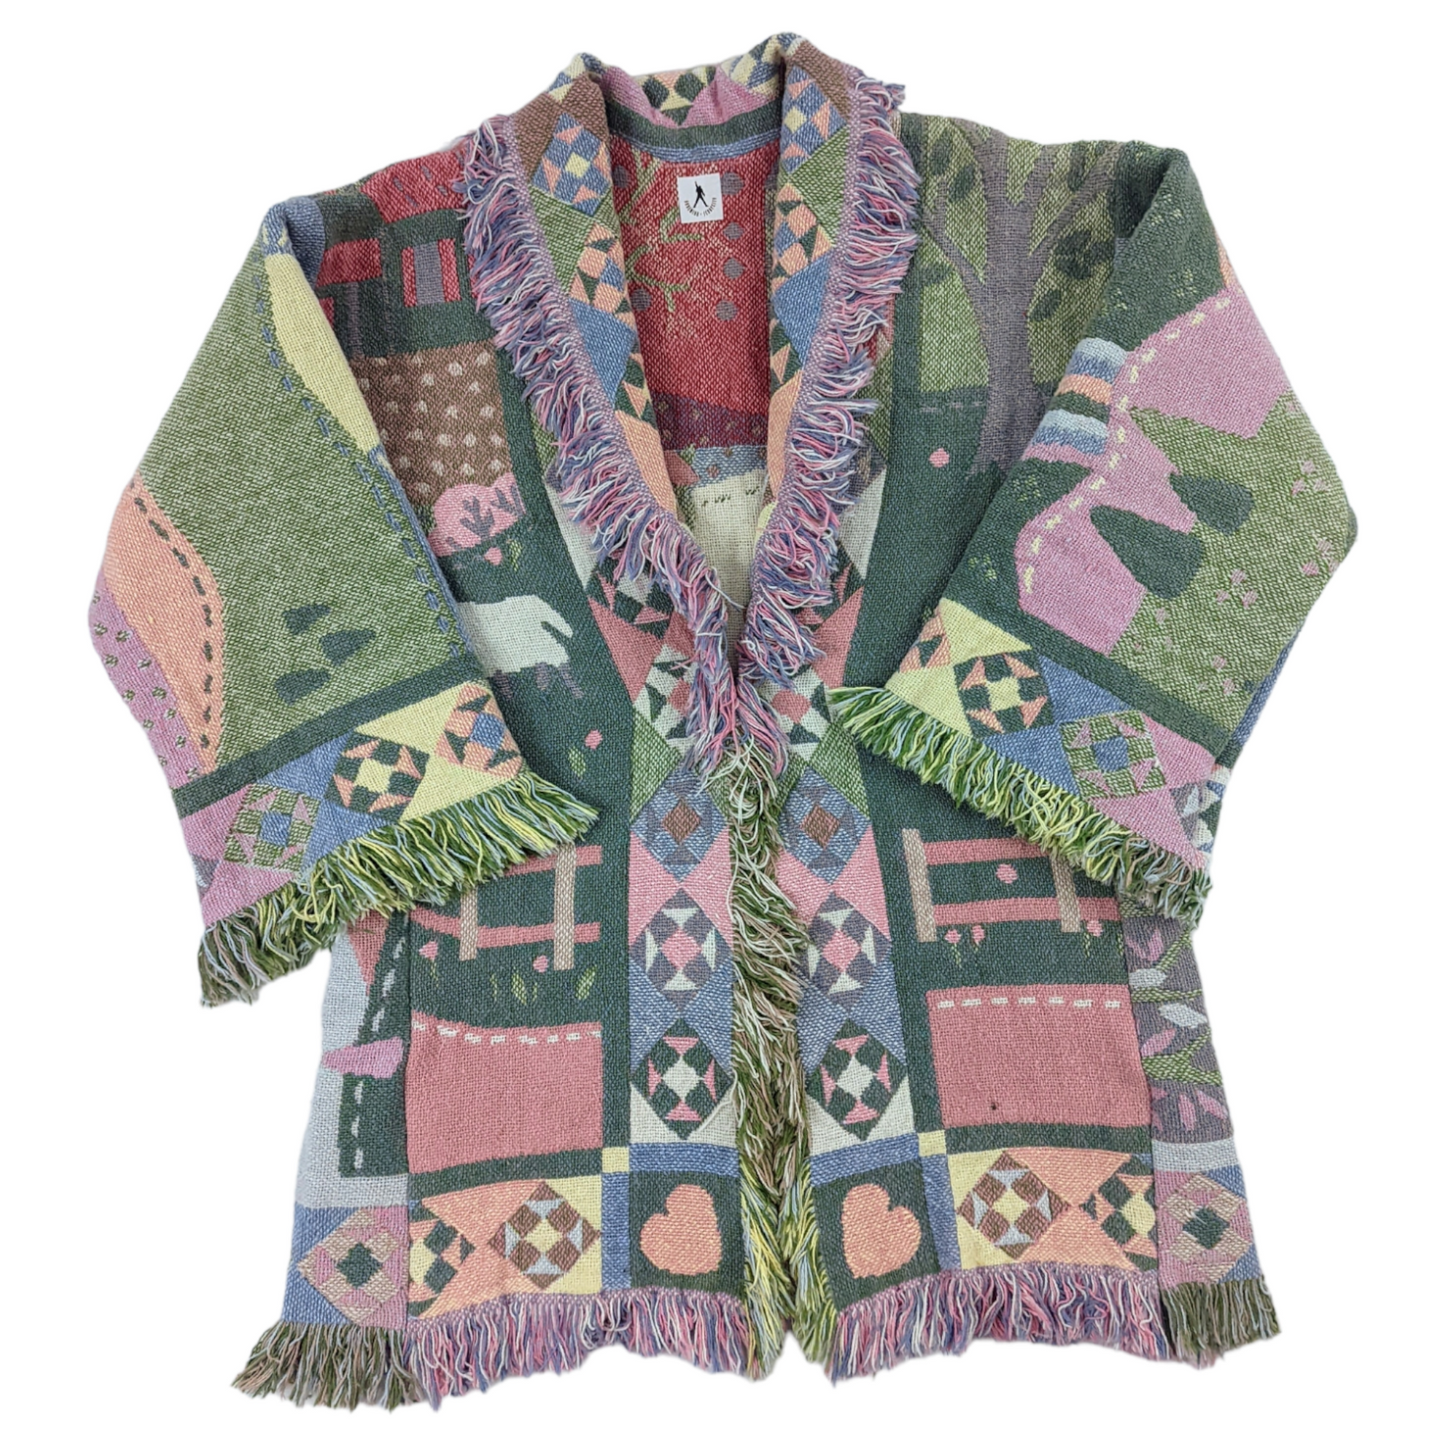 Flat lay of patchwork style quilt coat made from tapestry blanket in pastel shades.